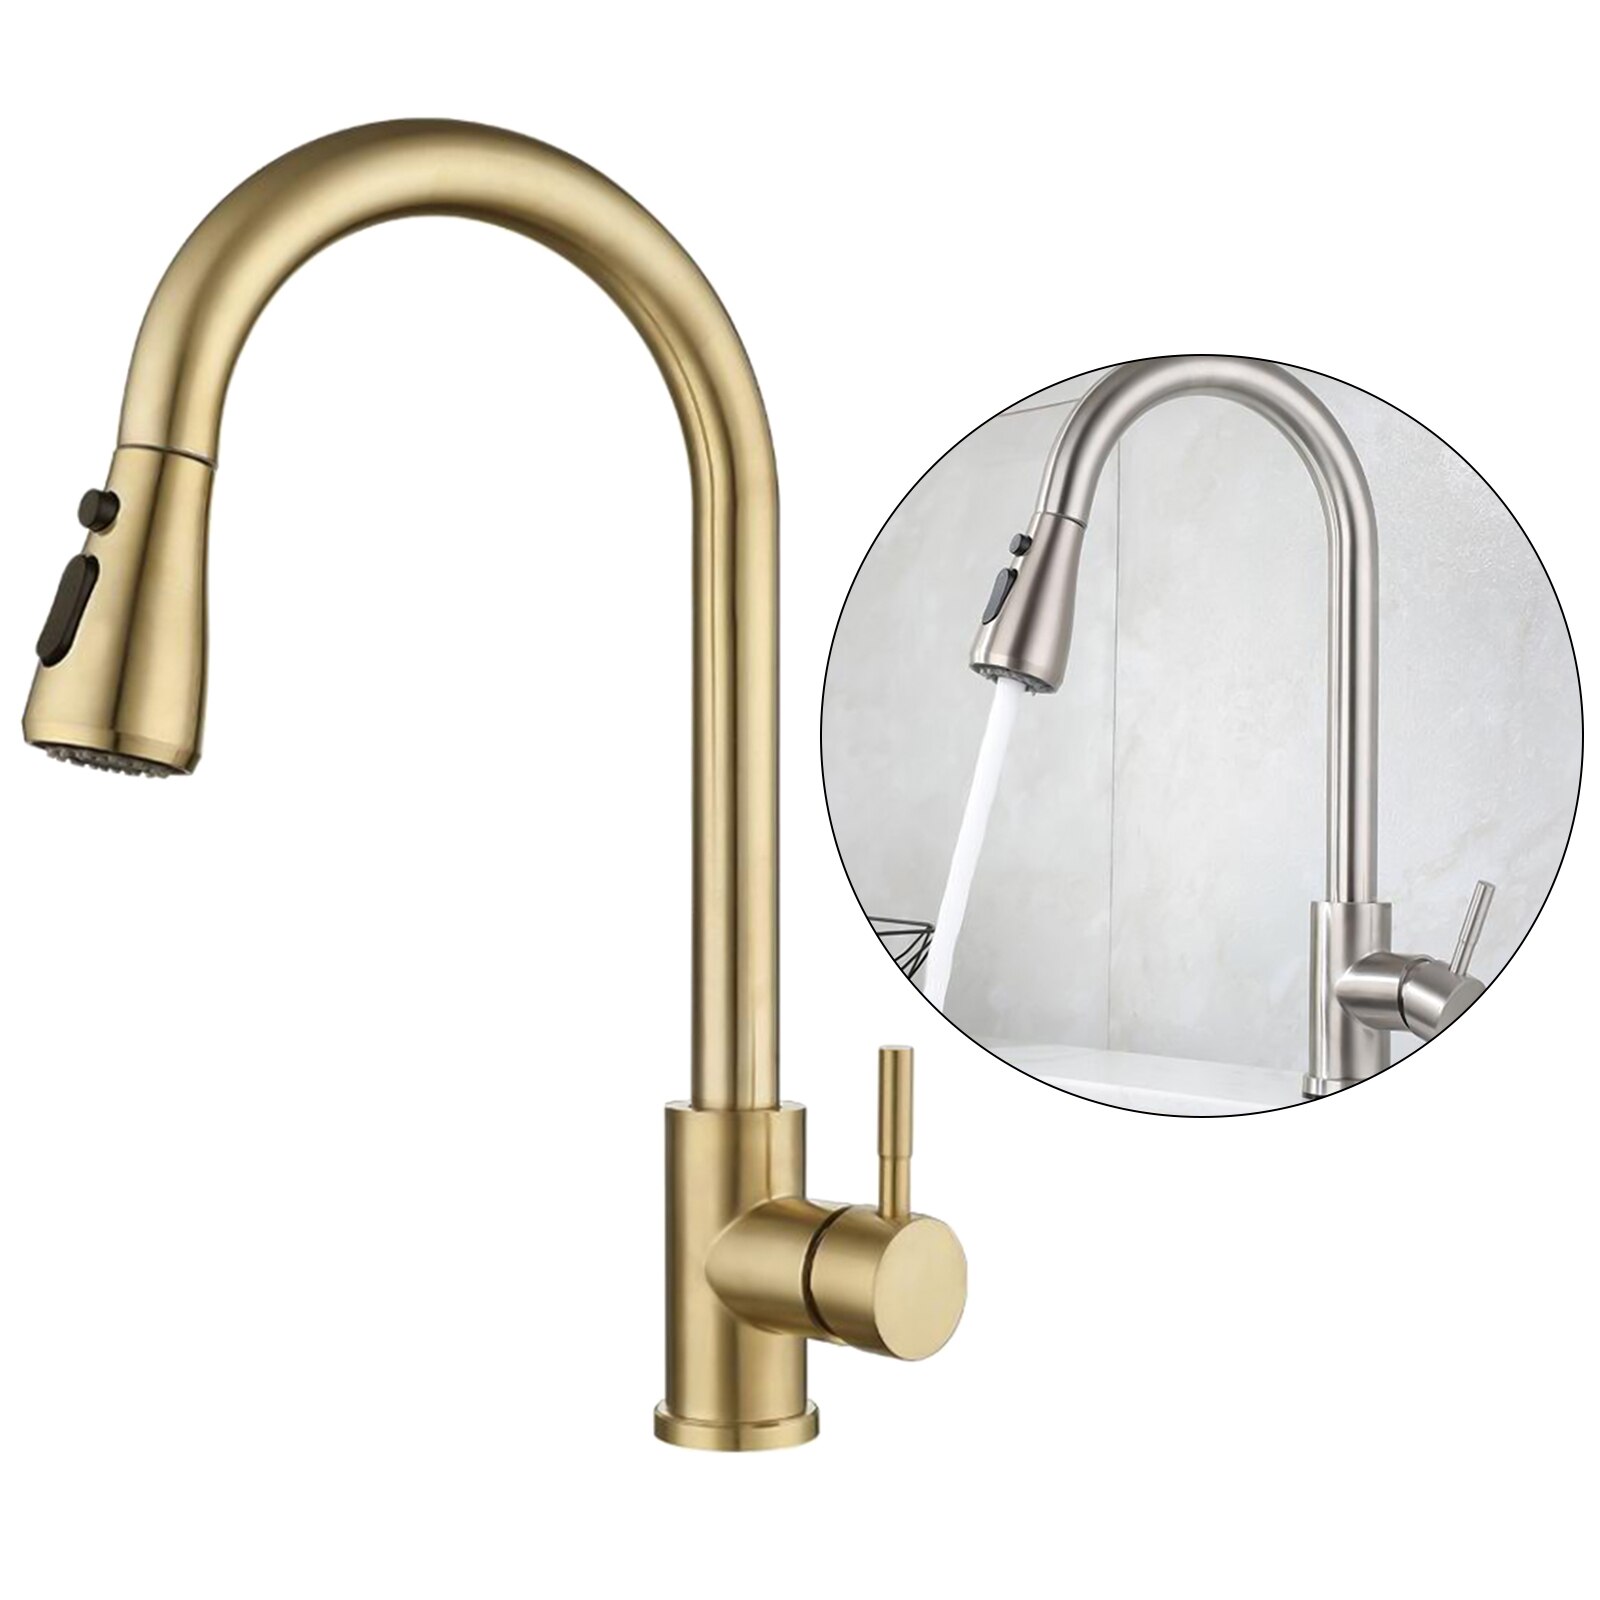 Smart Touch On Kitchen Faucet Sensor 360 Rotation Pull Out Single Handle Mixer Tap Two Water Modes Sink Crane Cold: Golden E